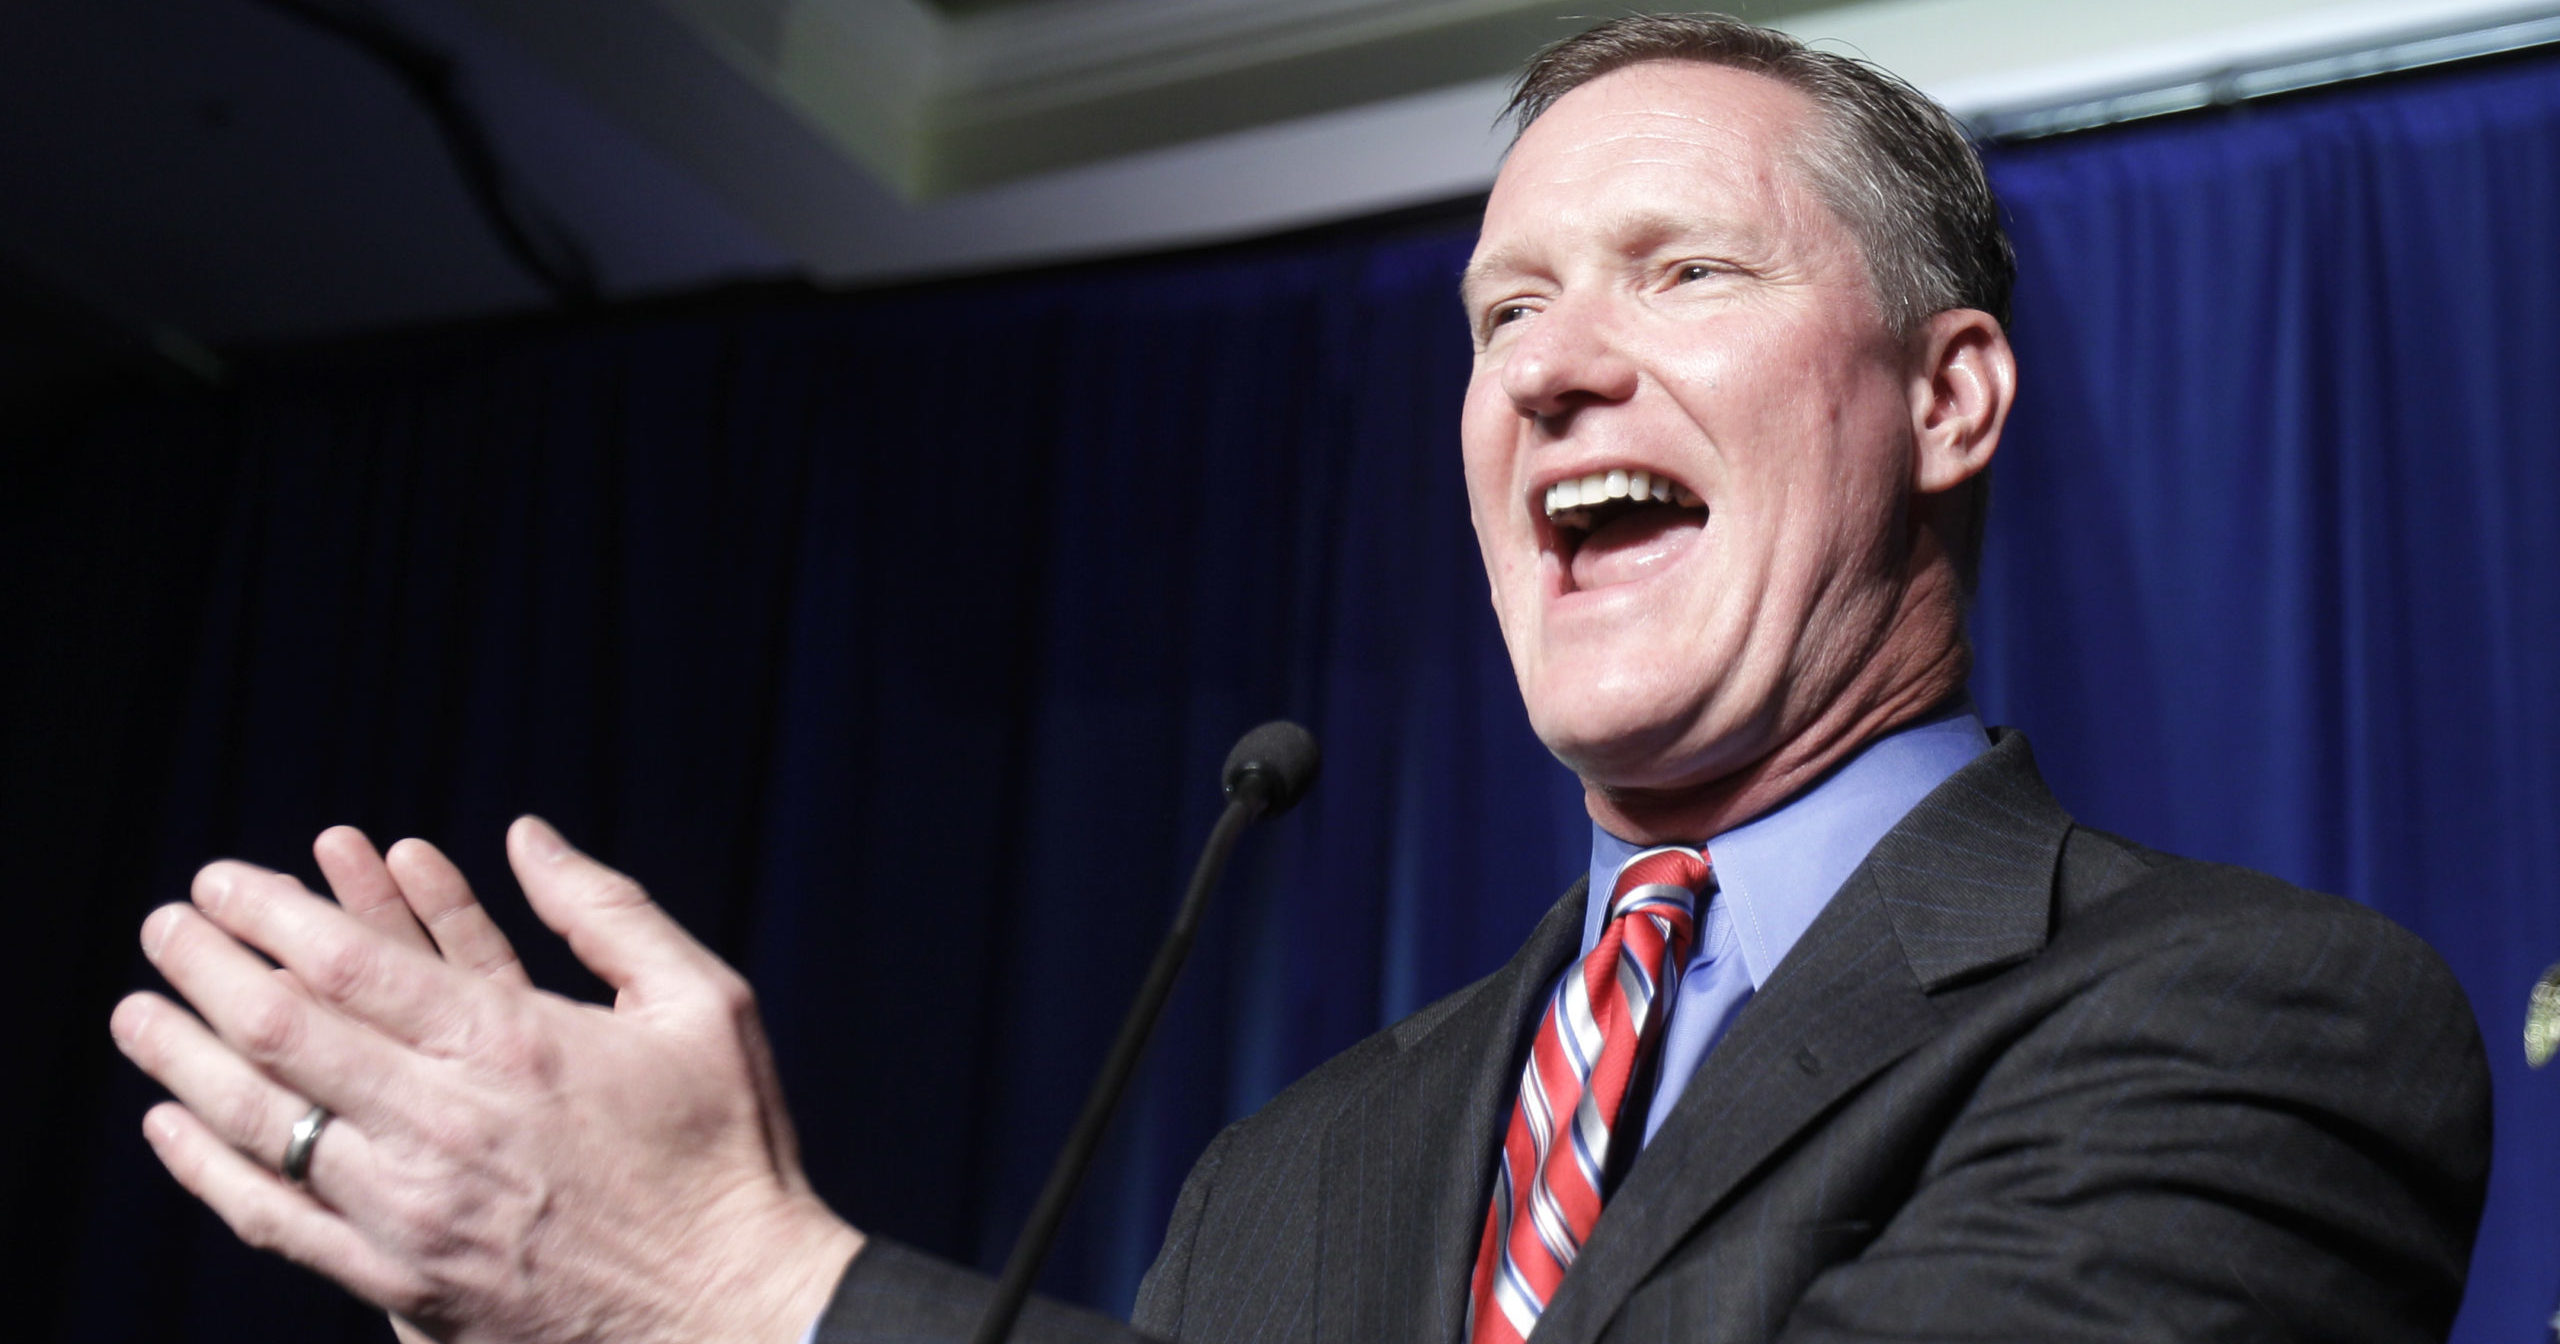 In this Nov. 2, 2010 file photo, Republican Steve Stivers speaks to supporters after defeating Democratic Rep. Mary Jo Kilroy in the 15th Congressional District during the Ohio Republican Party's election night celebration in Columbus, Ohio.